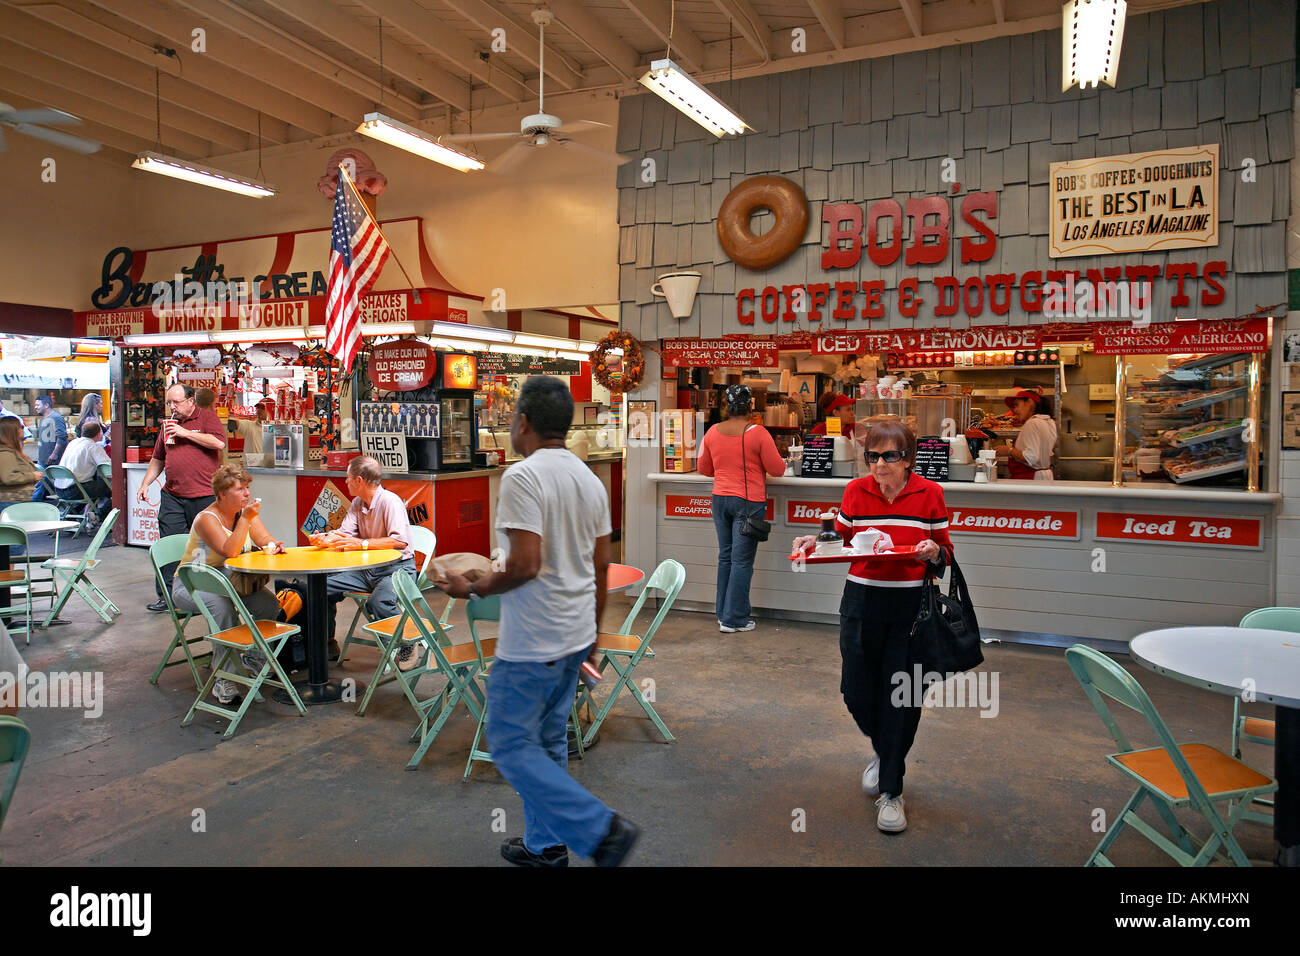 United States, California, Los Angeles, Beverly Hills, Original Farmers Market, grocery stalls and boutiques Stock Photo